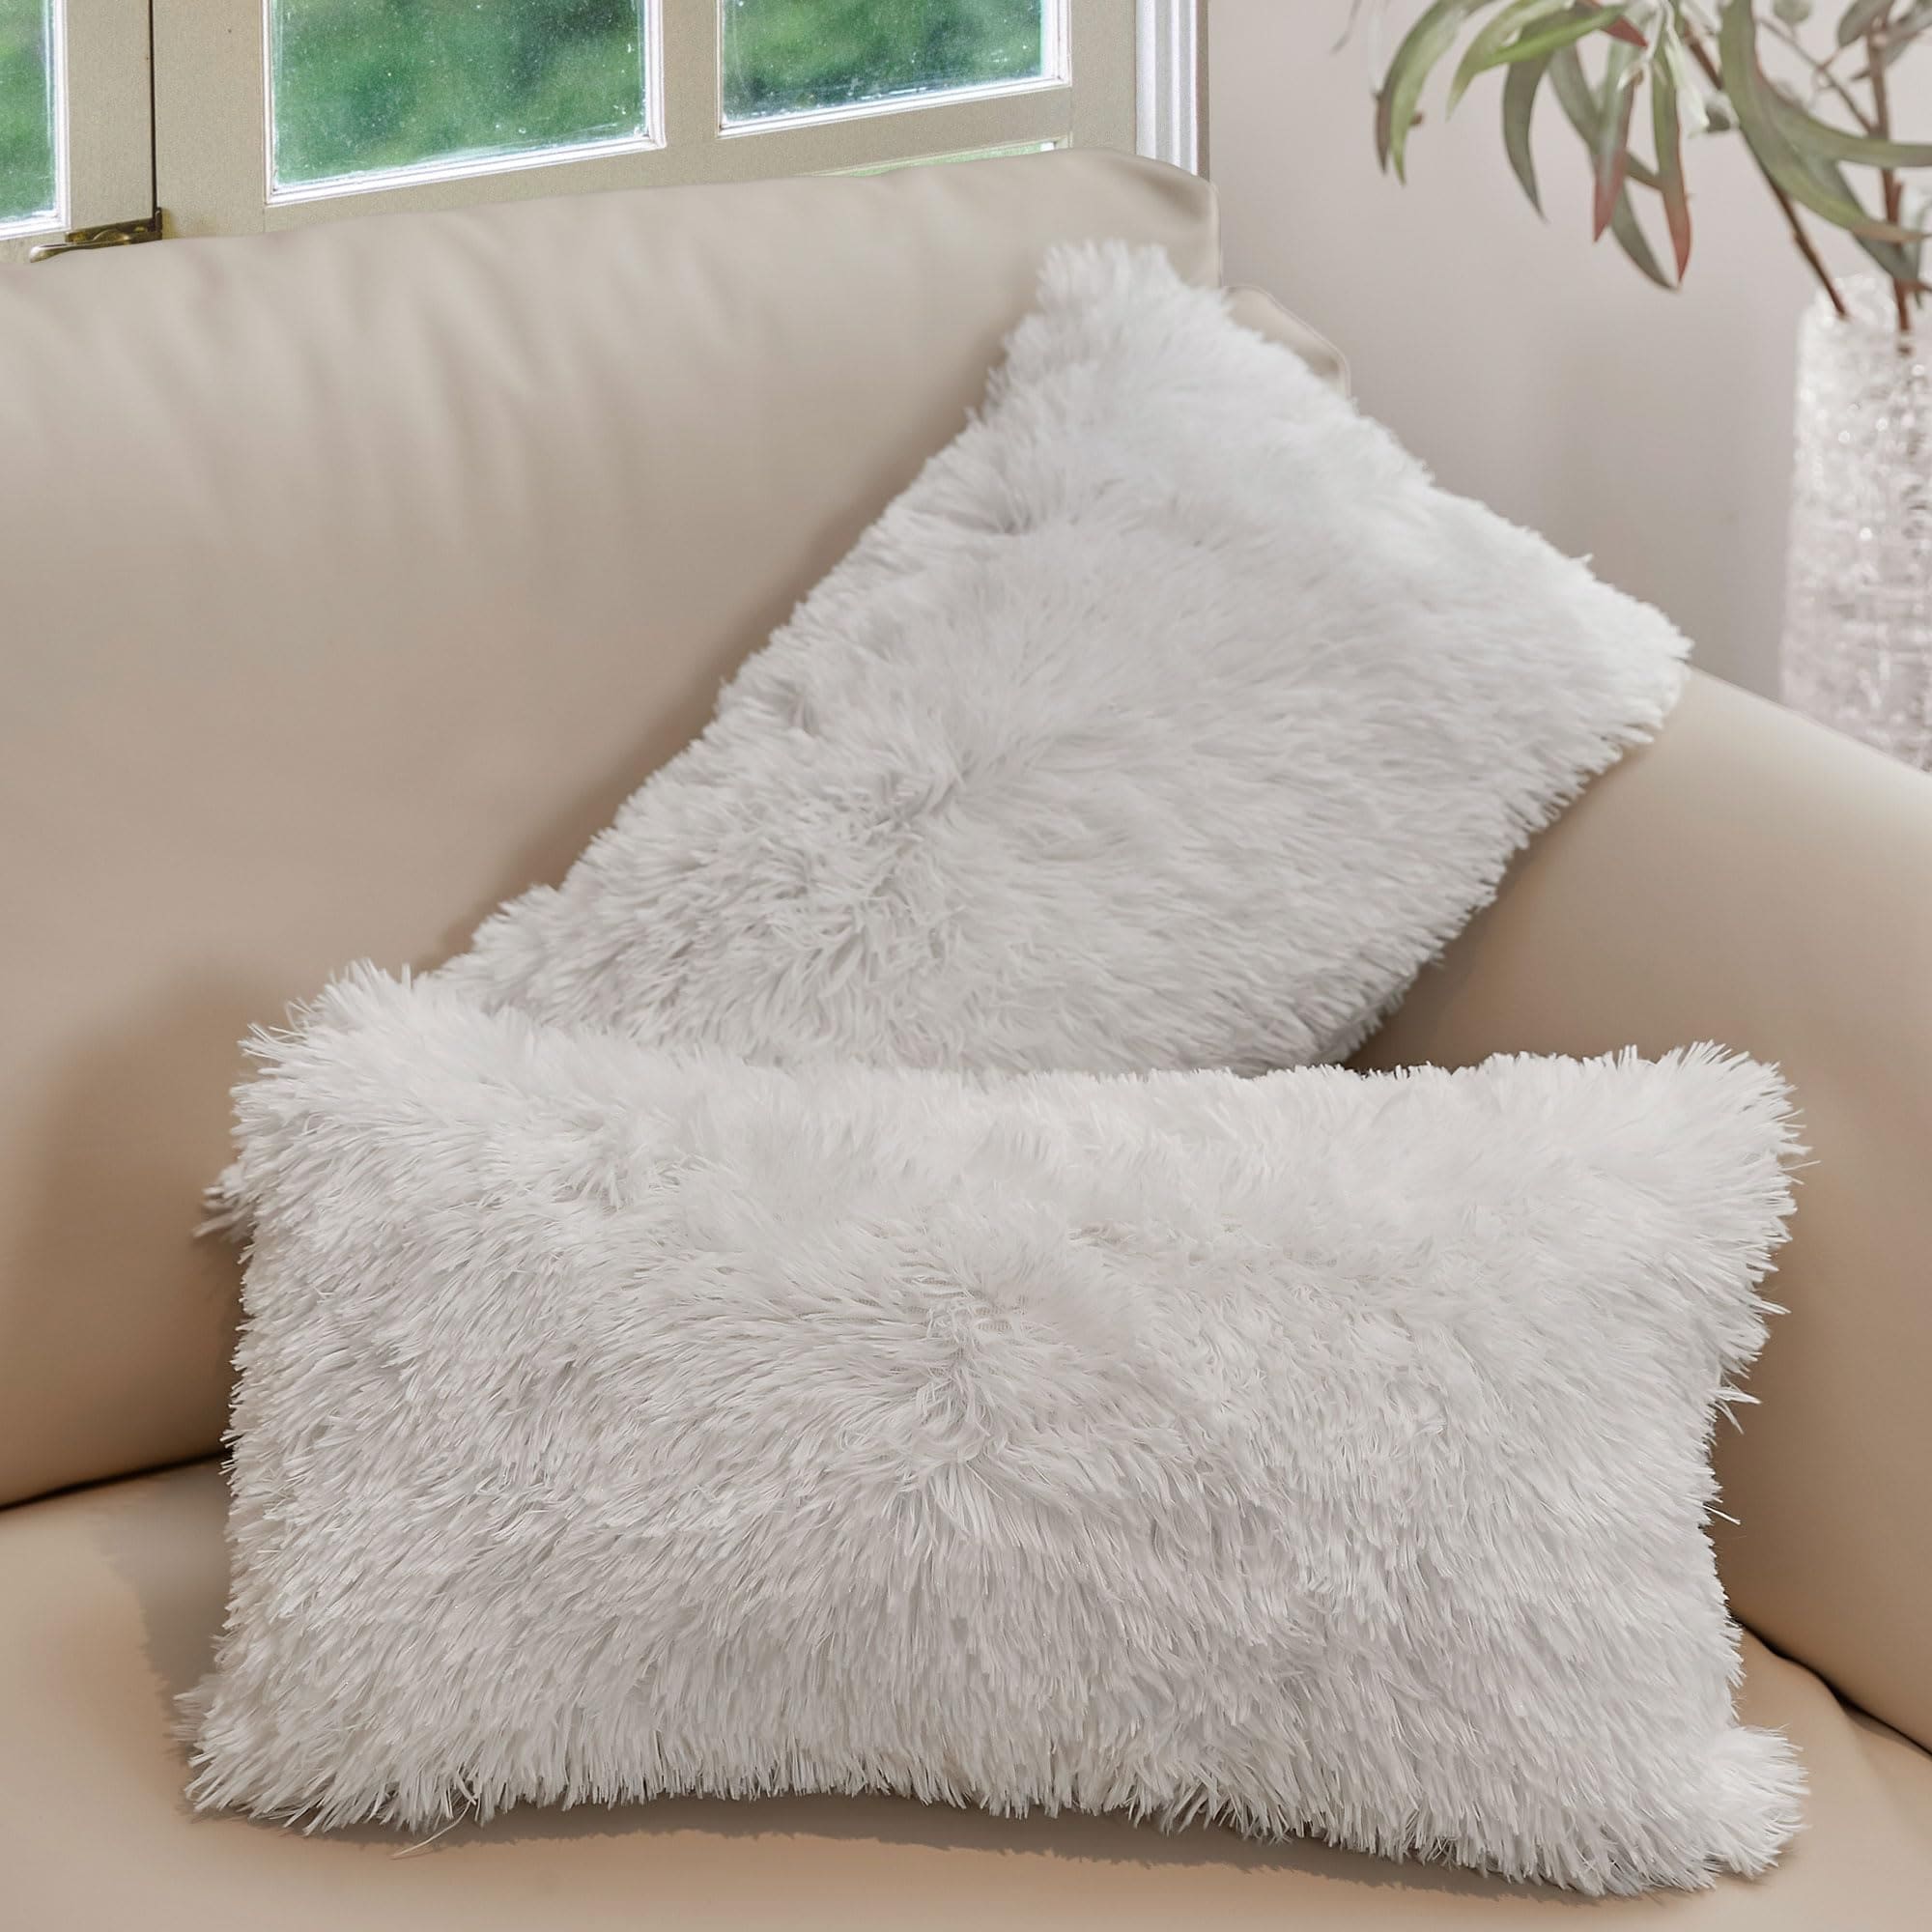  Cheer Collection Set of 2 Shaggy Long Hair Throw Pillows -  Super Soft Faux Fur Pillows for Sofa & Bed - Machine Washable - 18 x 18 -  Gray : Home & Kitchen